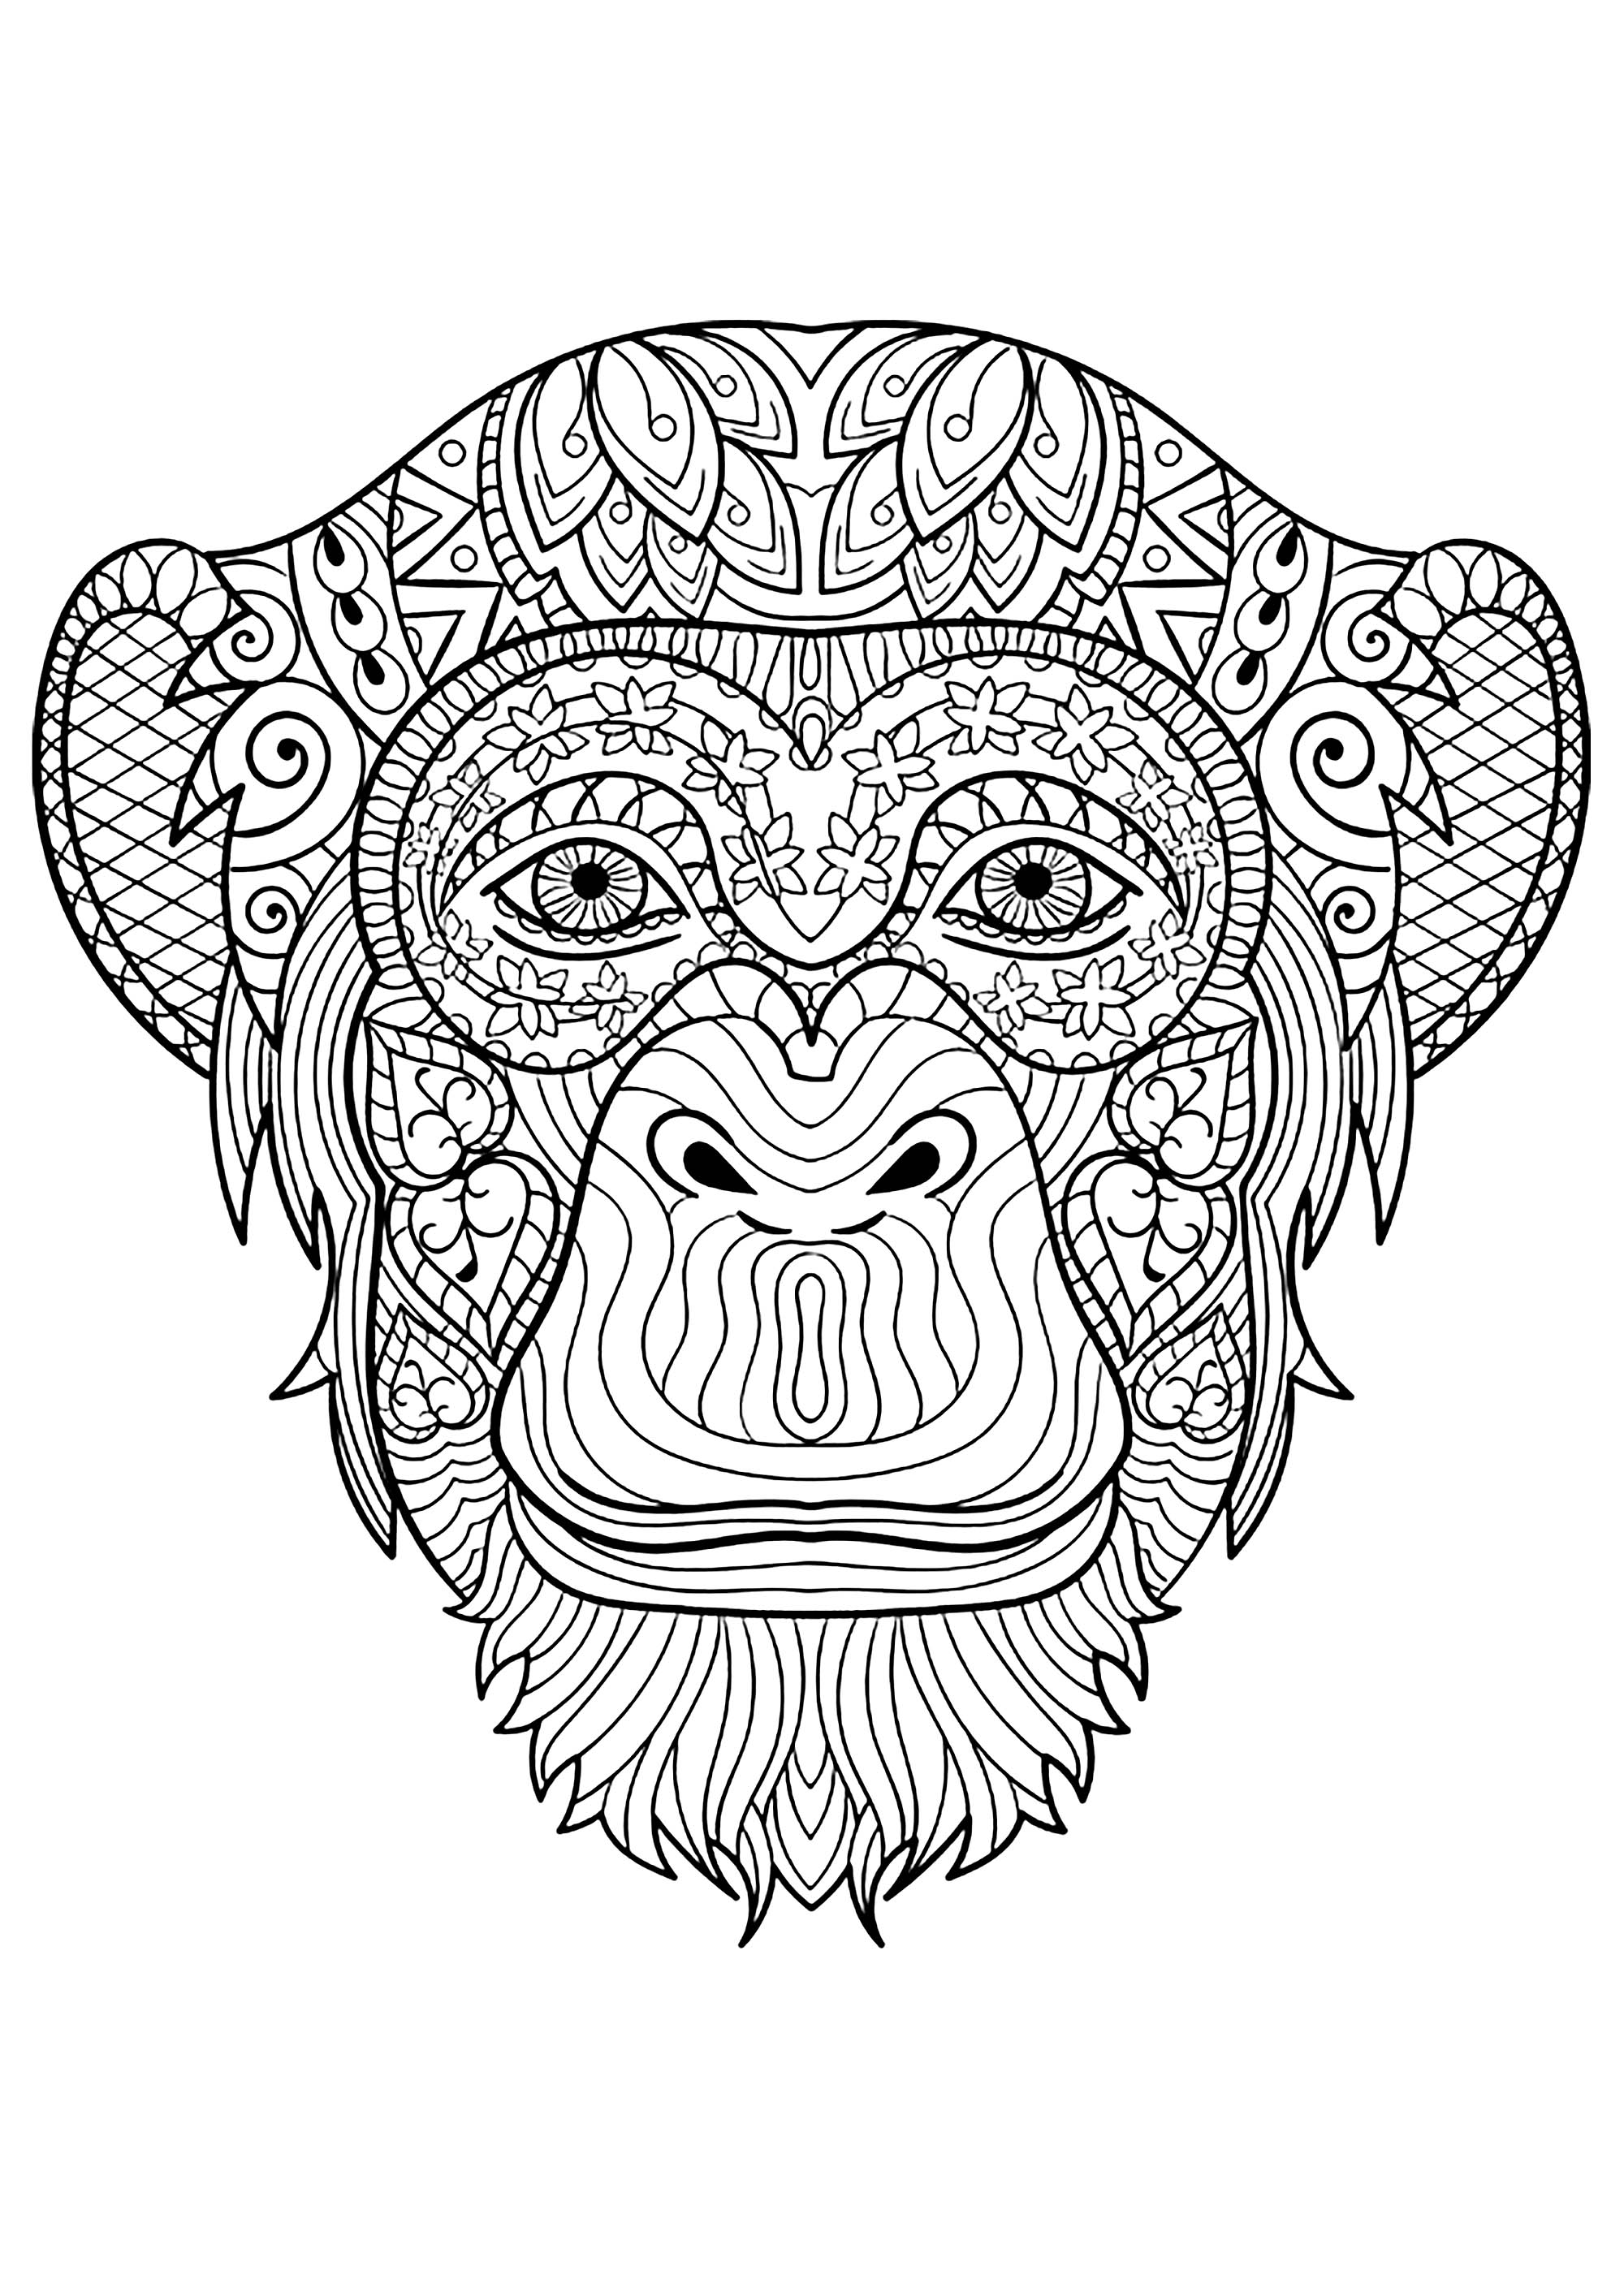 monkey christmas coloring pages